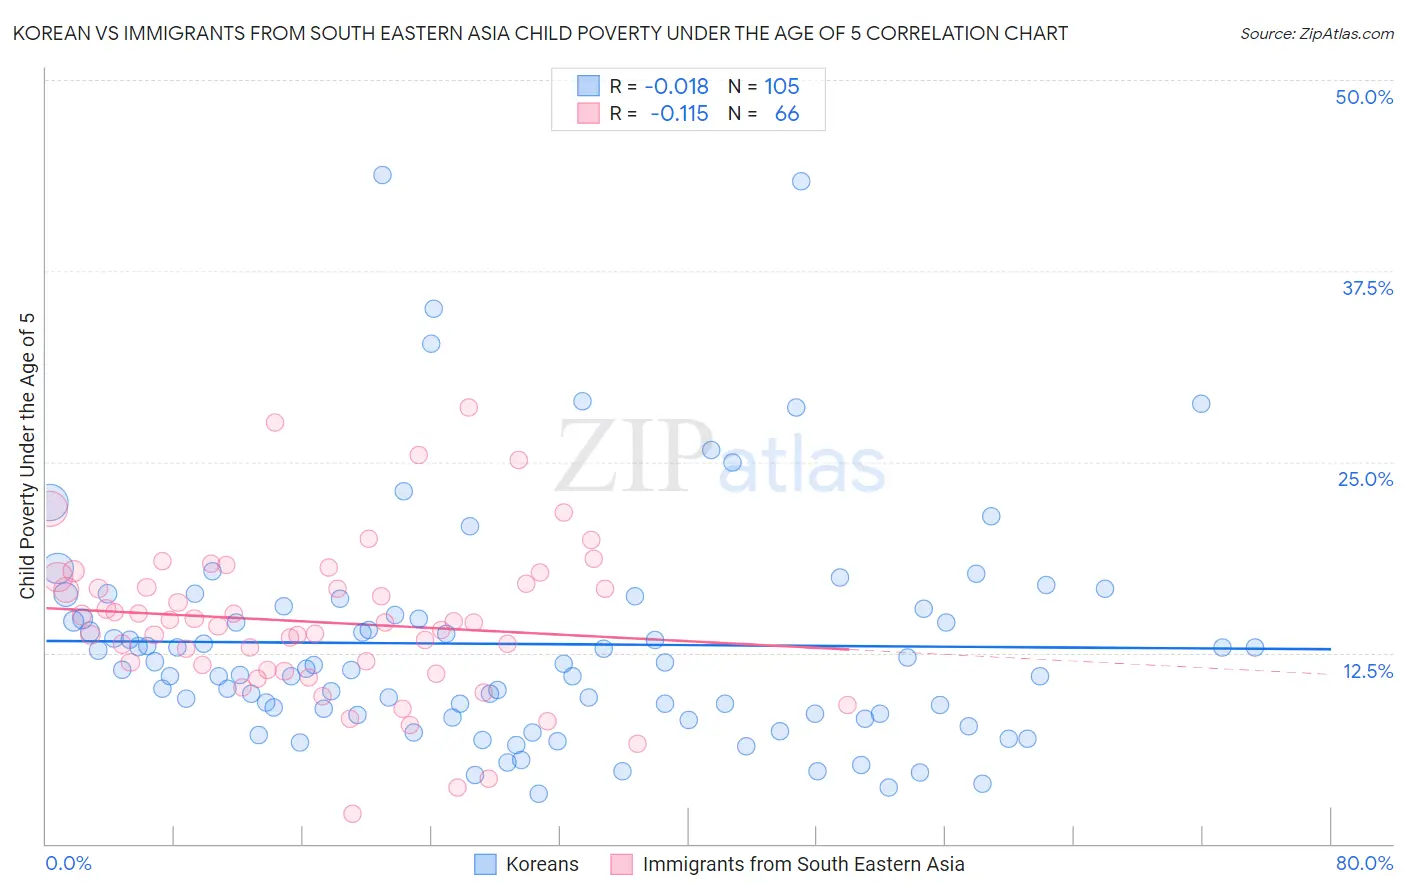 Korean vs Immigrants from South Eastern Asia Child Poverty Under the Age of 5